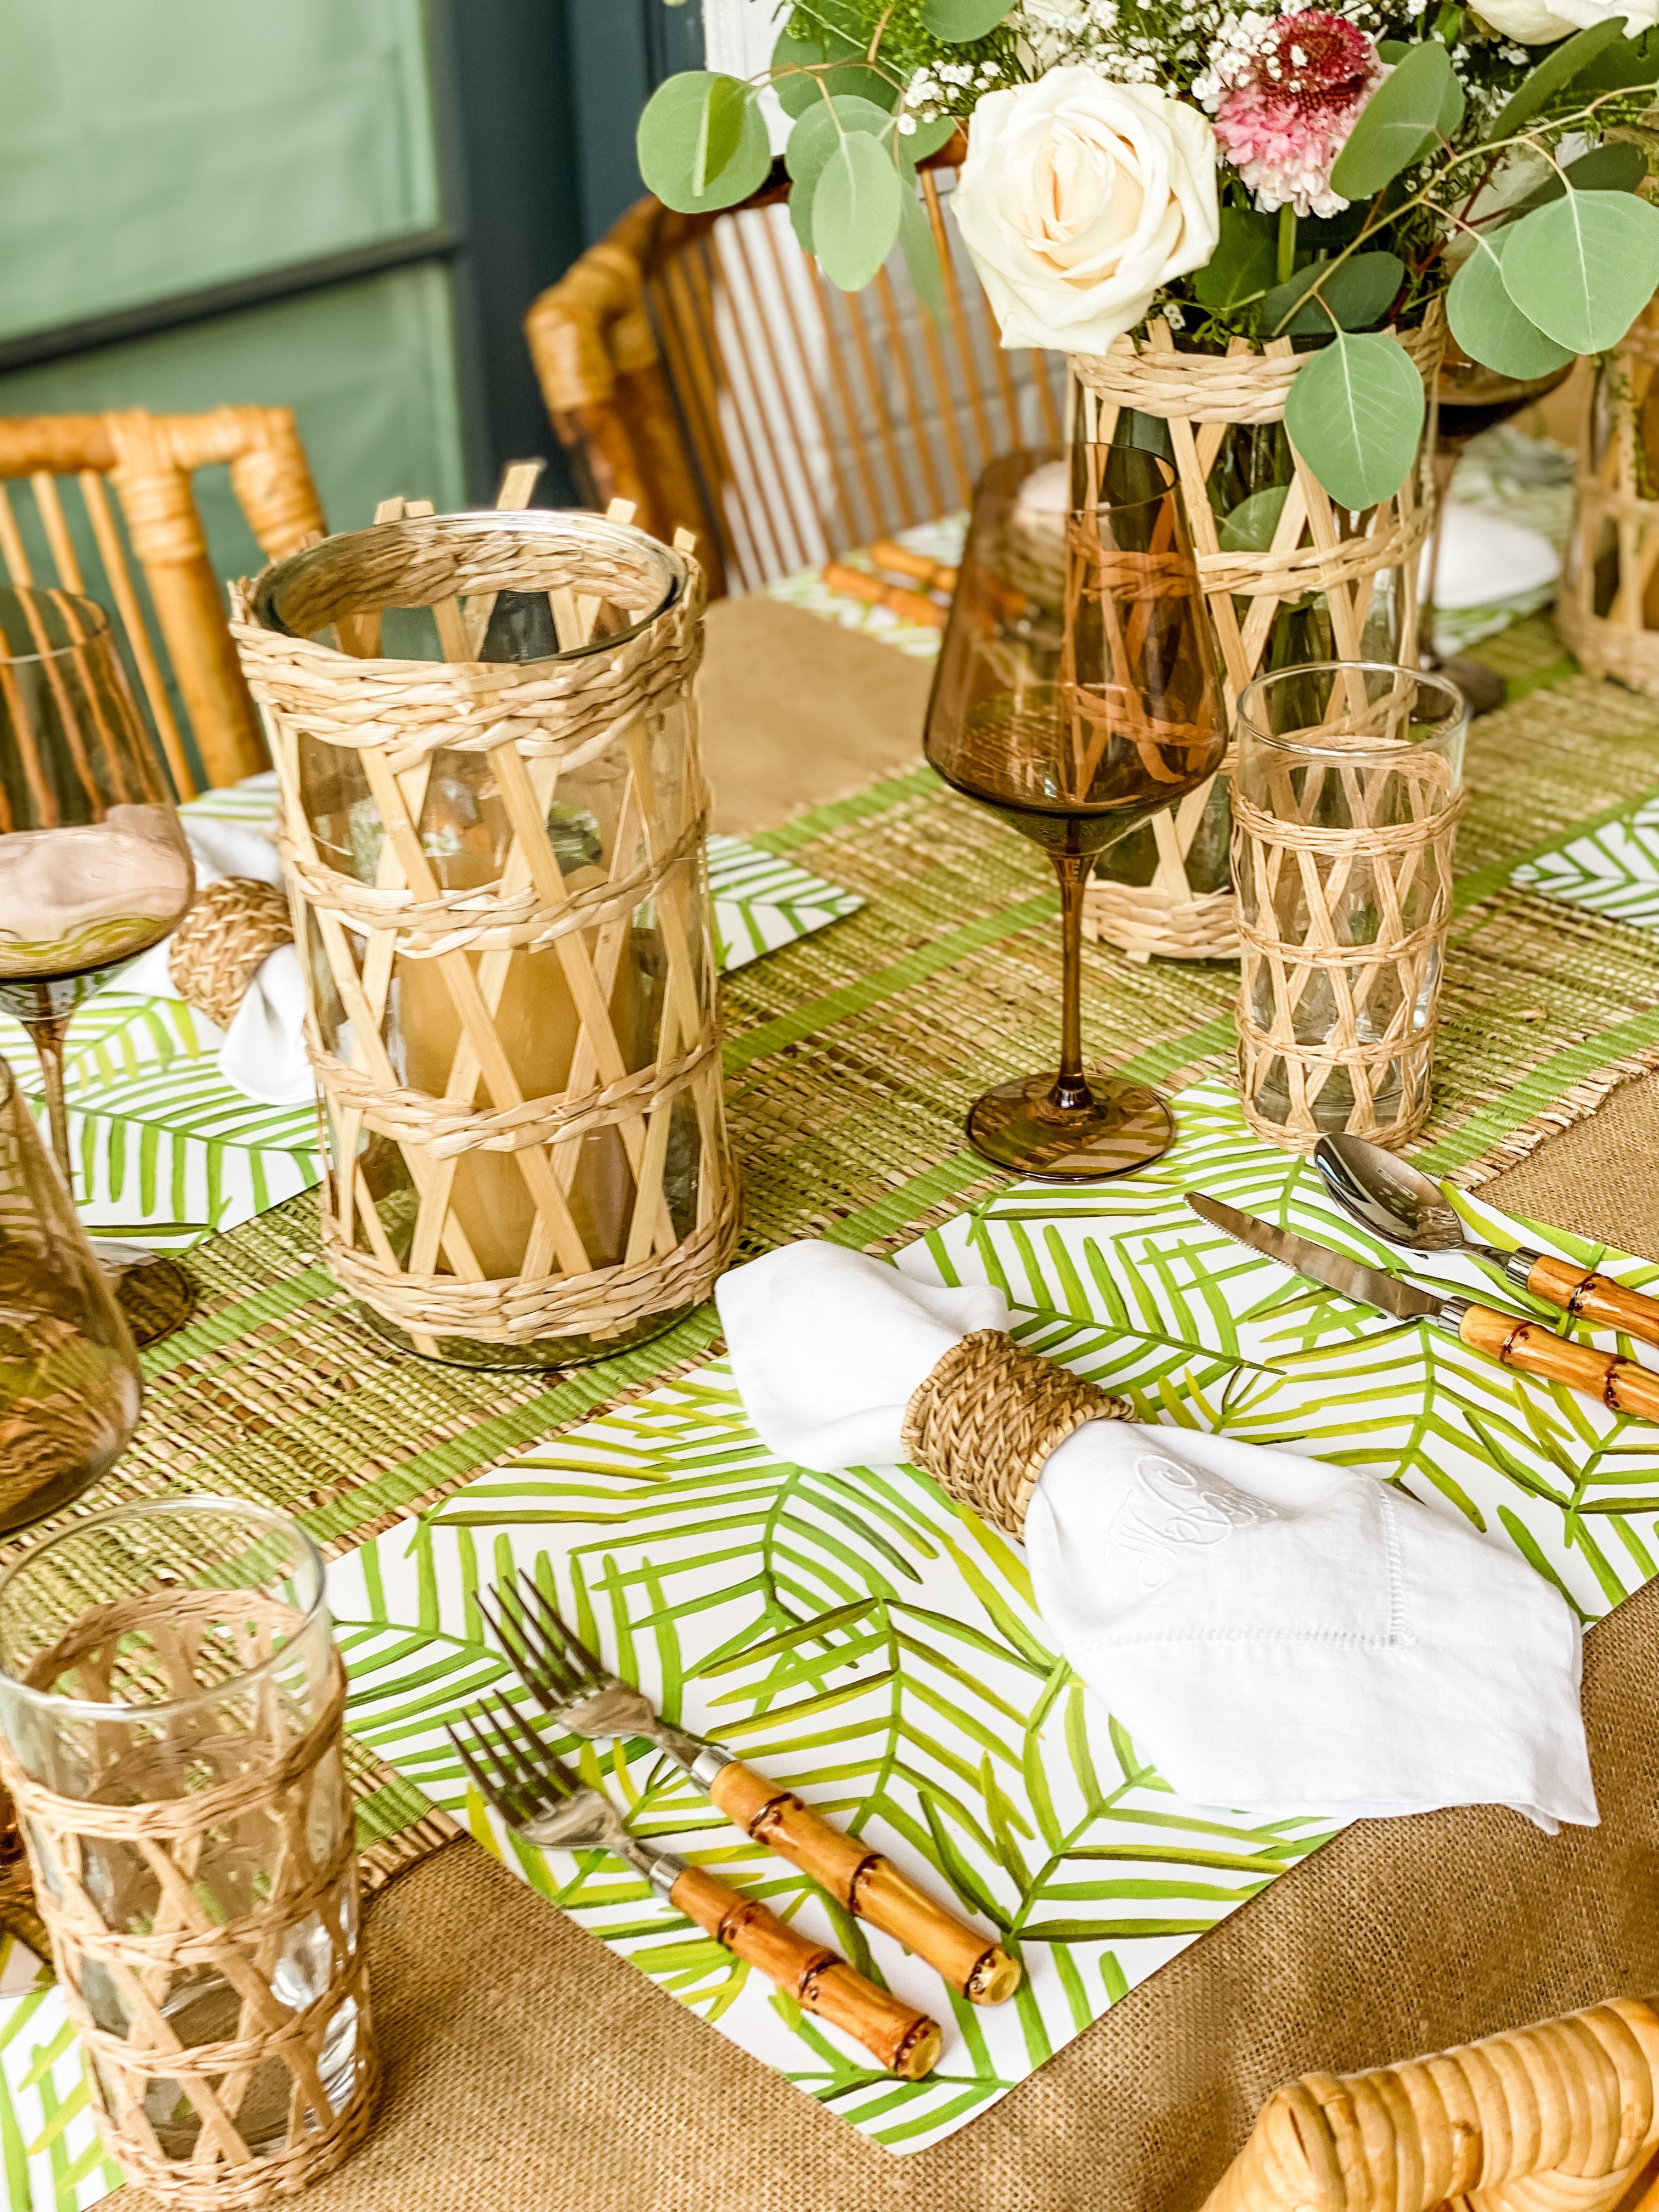 Green leaf paper placemats on a brown tablecloth with white napkins and other bamboo elements